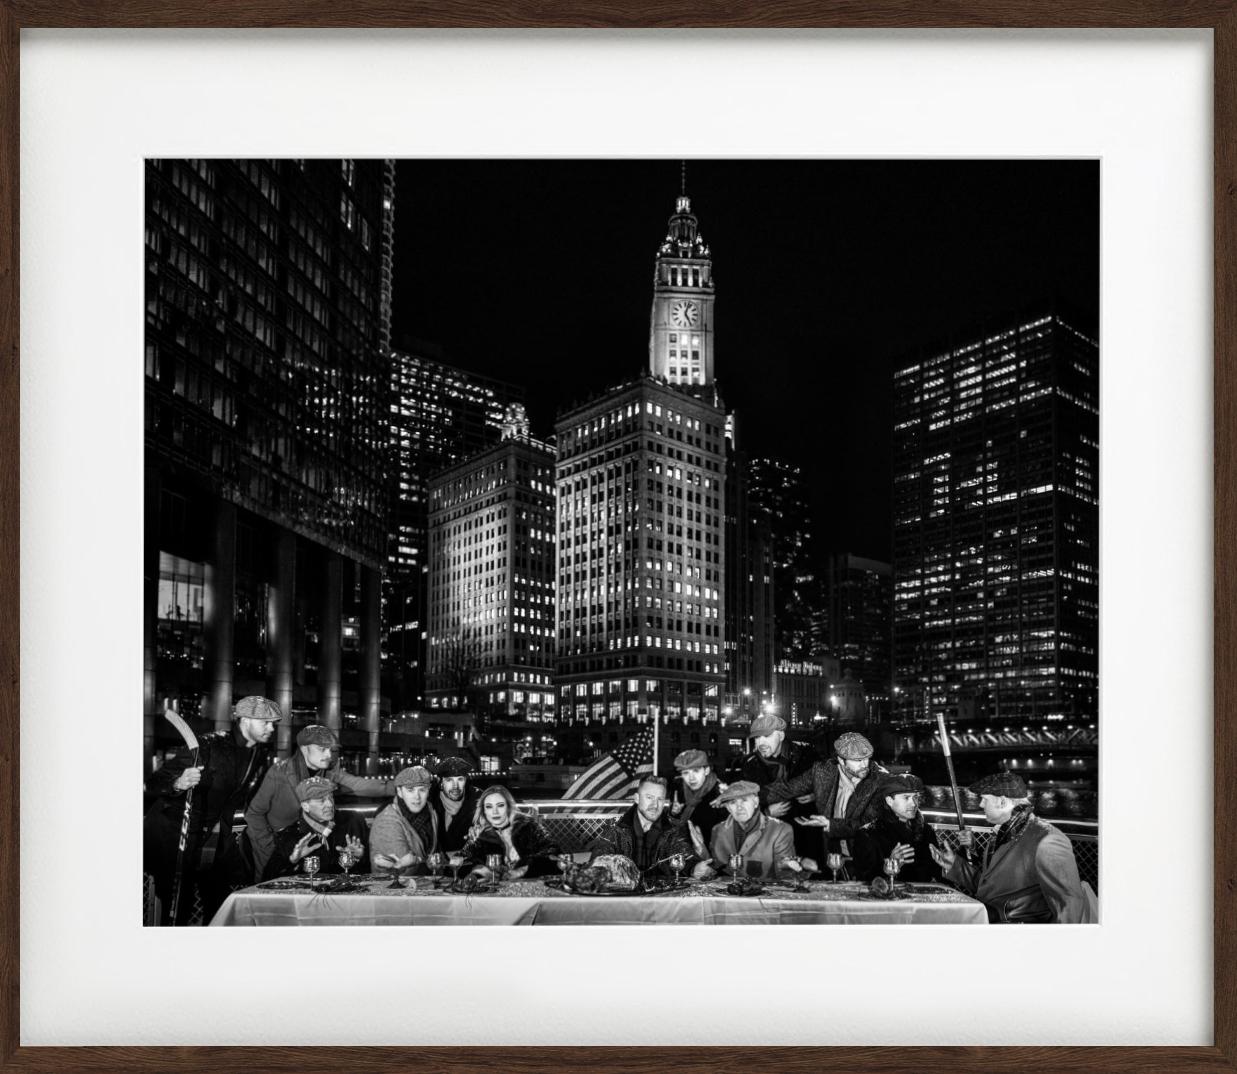 The Last Supper in Chicago - Chicago skyline and Blackhawks players sitting down - Photograph by David Yarrow